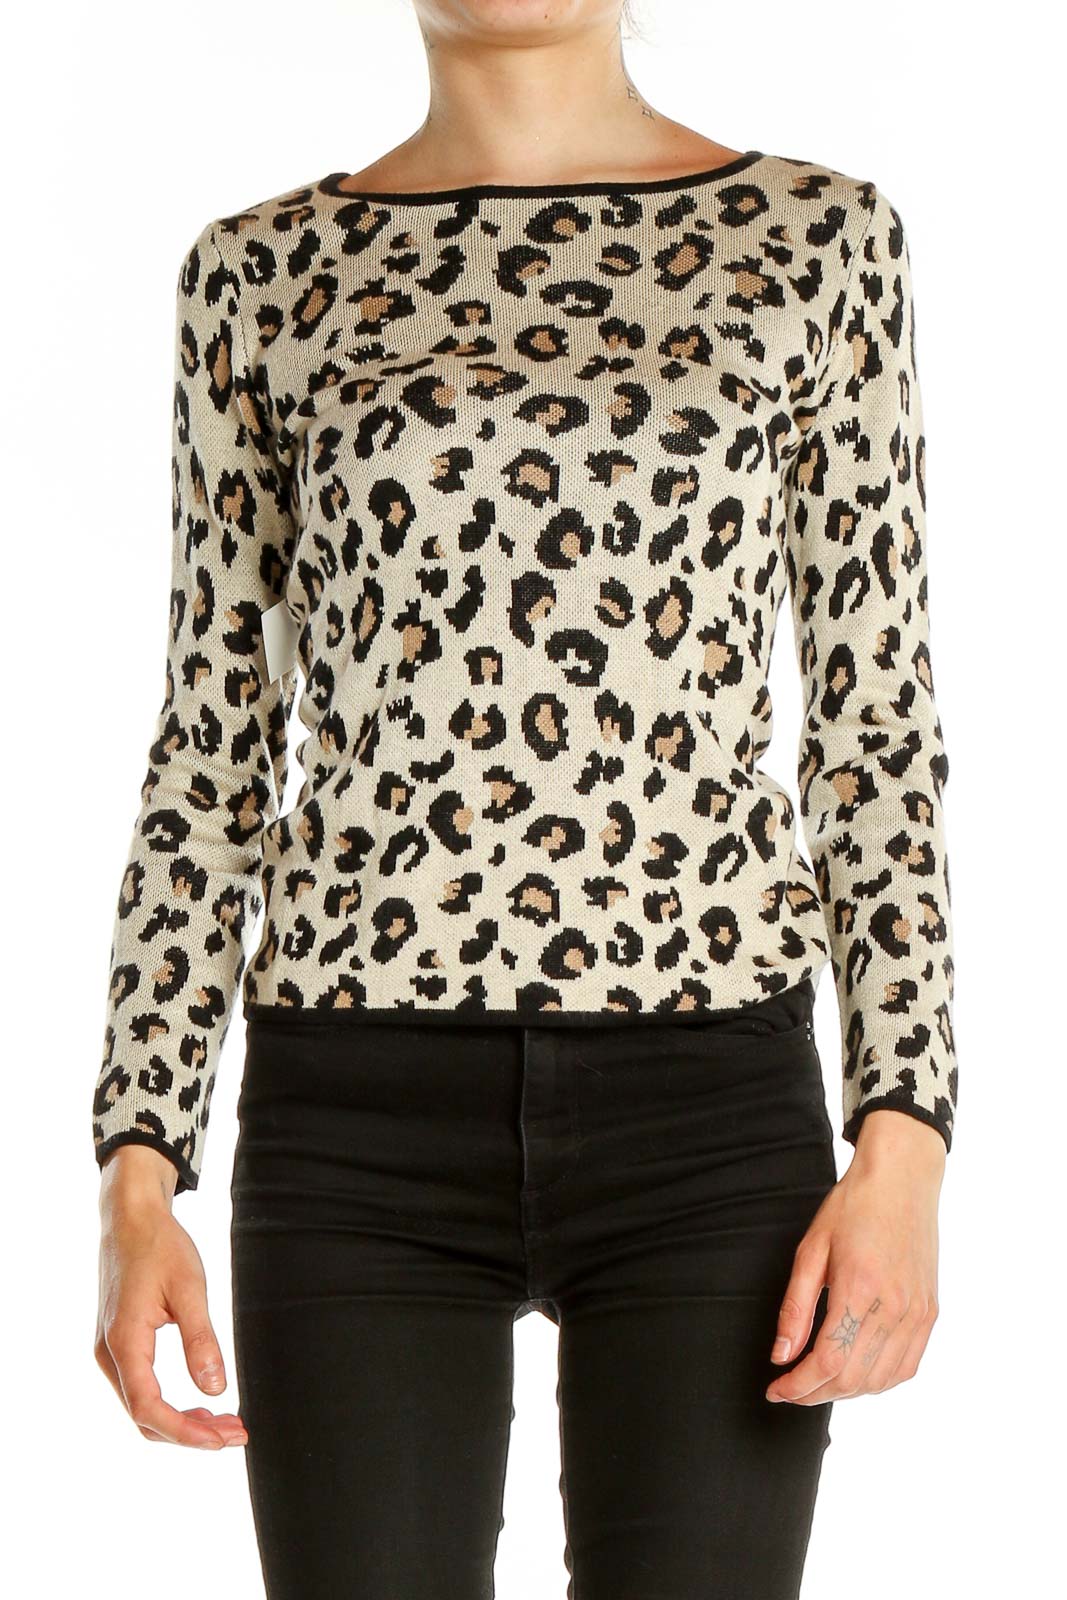 Beige Animal Print All Day Wear Top Front